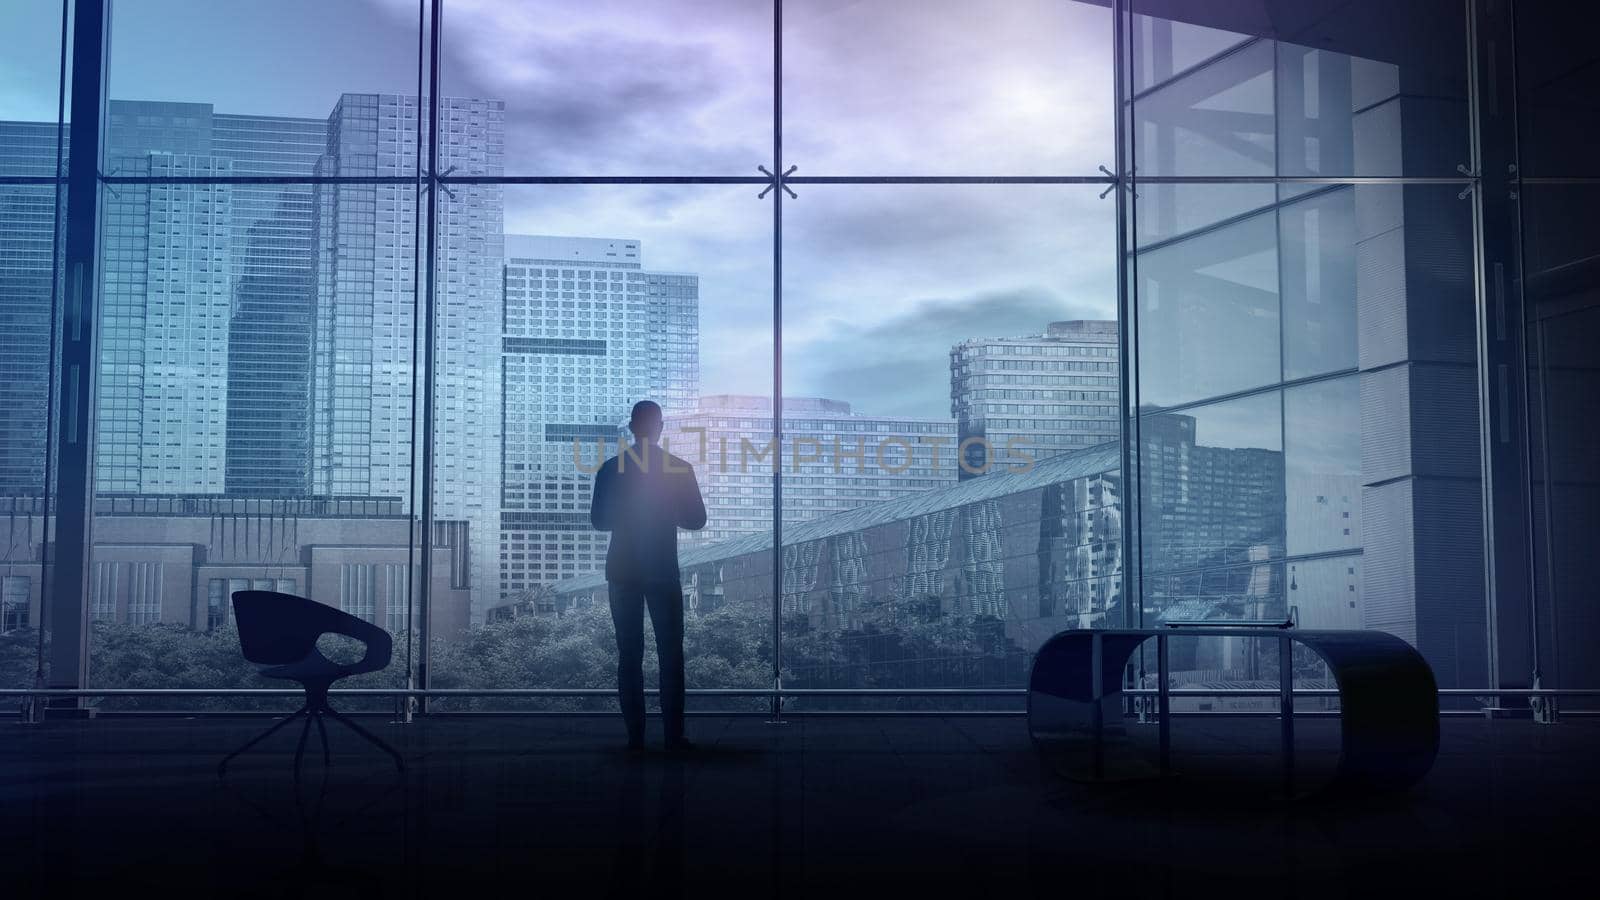 In a spacious office, a man stands and looks at city buildings, 3D render. by ConceptCafe